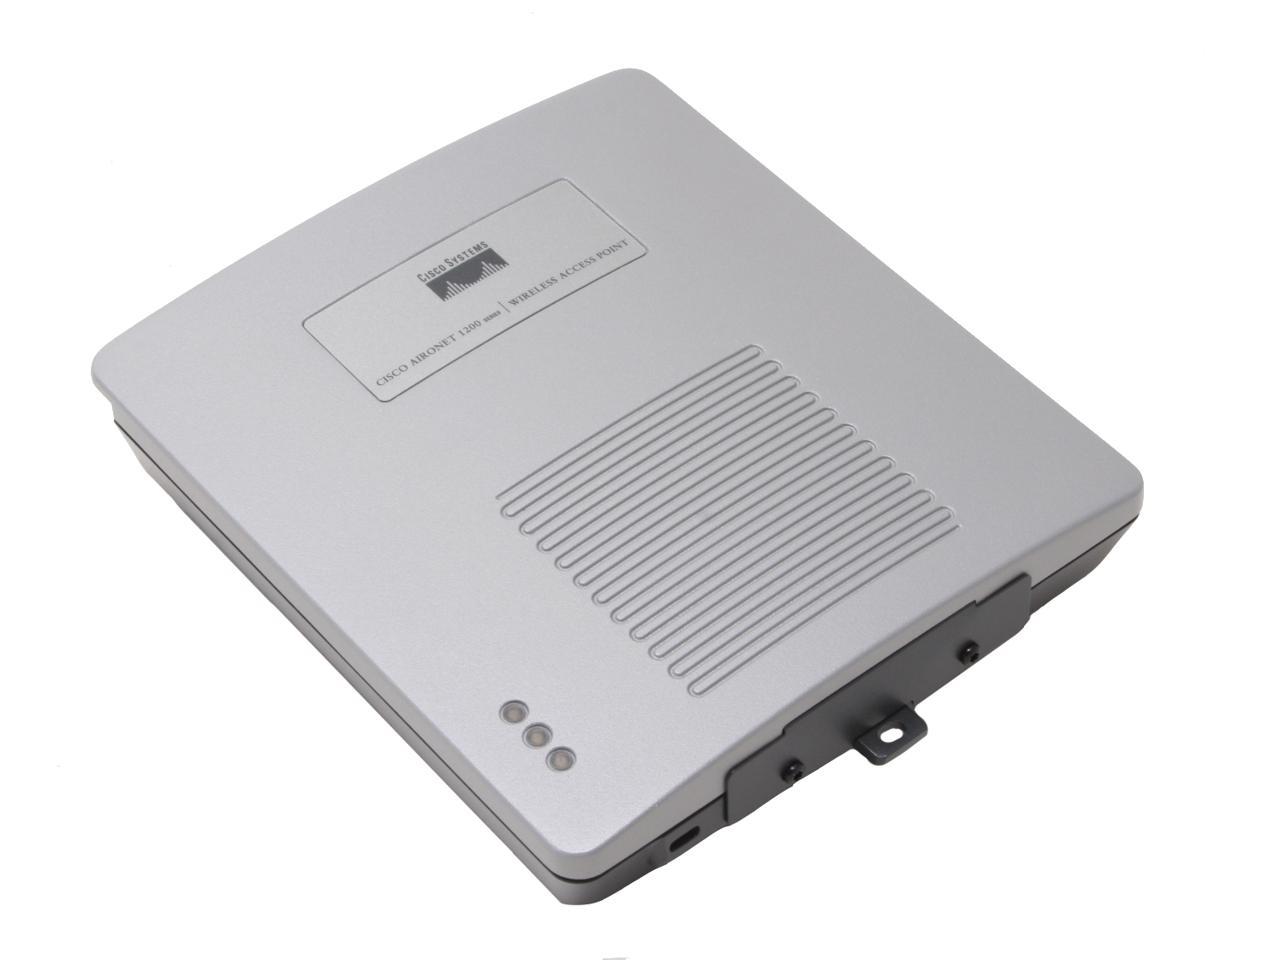 Cisco Access Point 54 Mbps 1-Port 10/100 Wireless G Router AIR-AP1231G-A-K9 for sale online